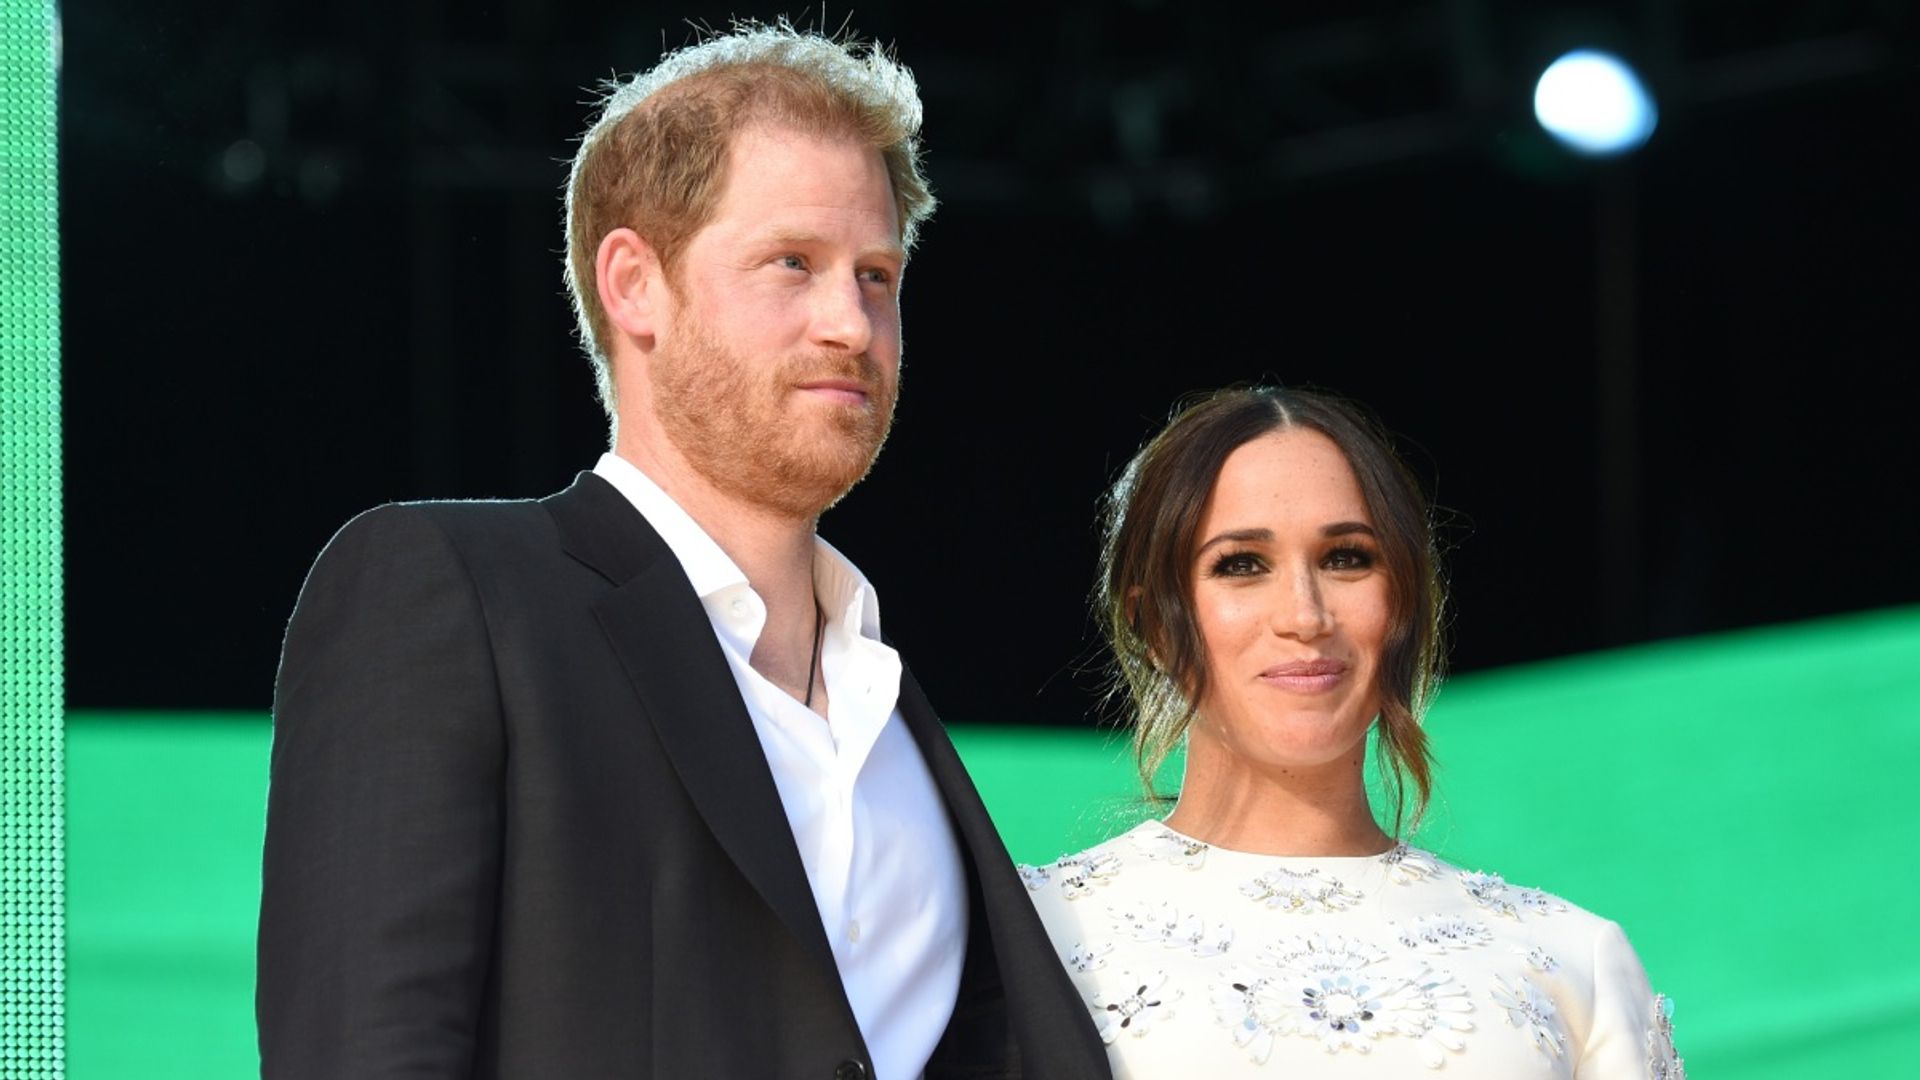 Meghan Markle and Prince Harry deliver impassioned speech after loved-up display at Global Citizen Live